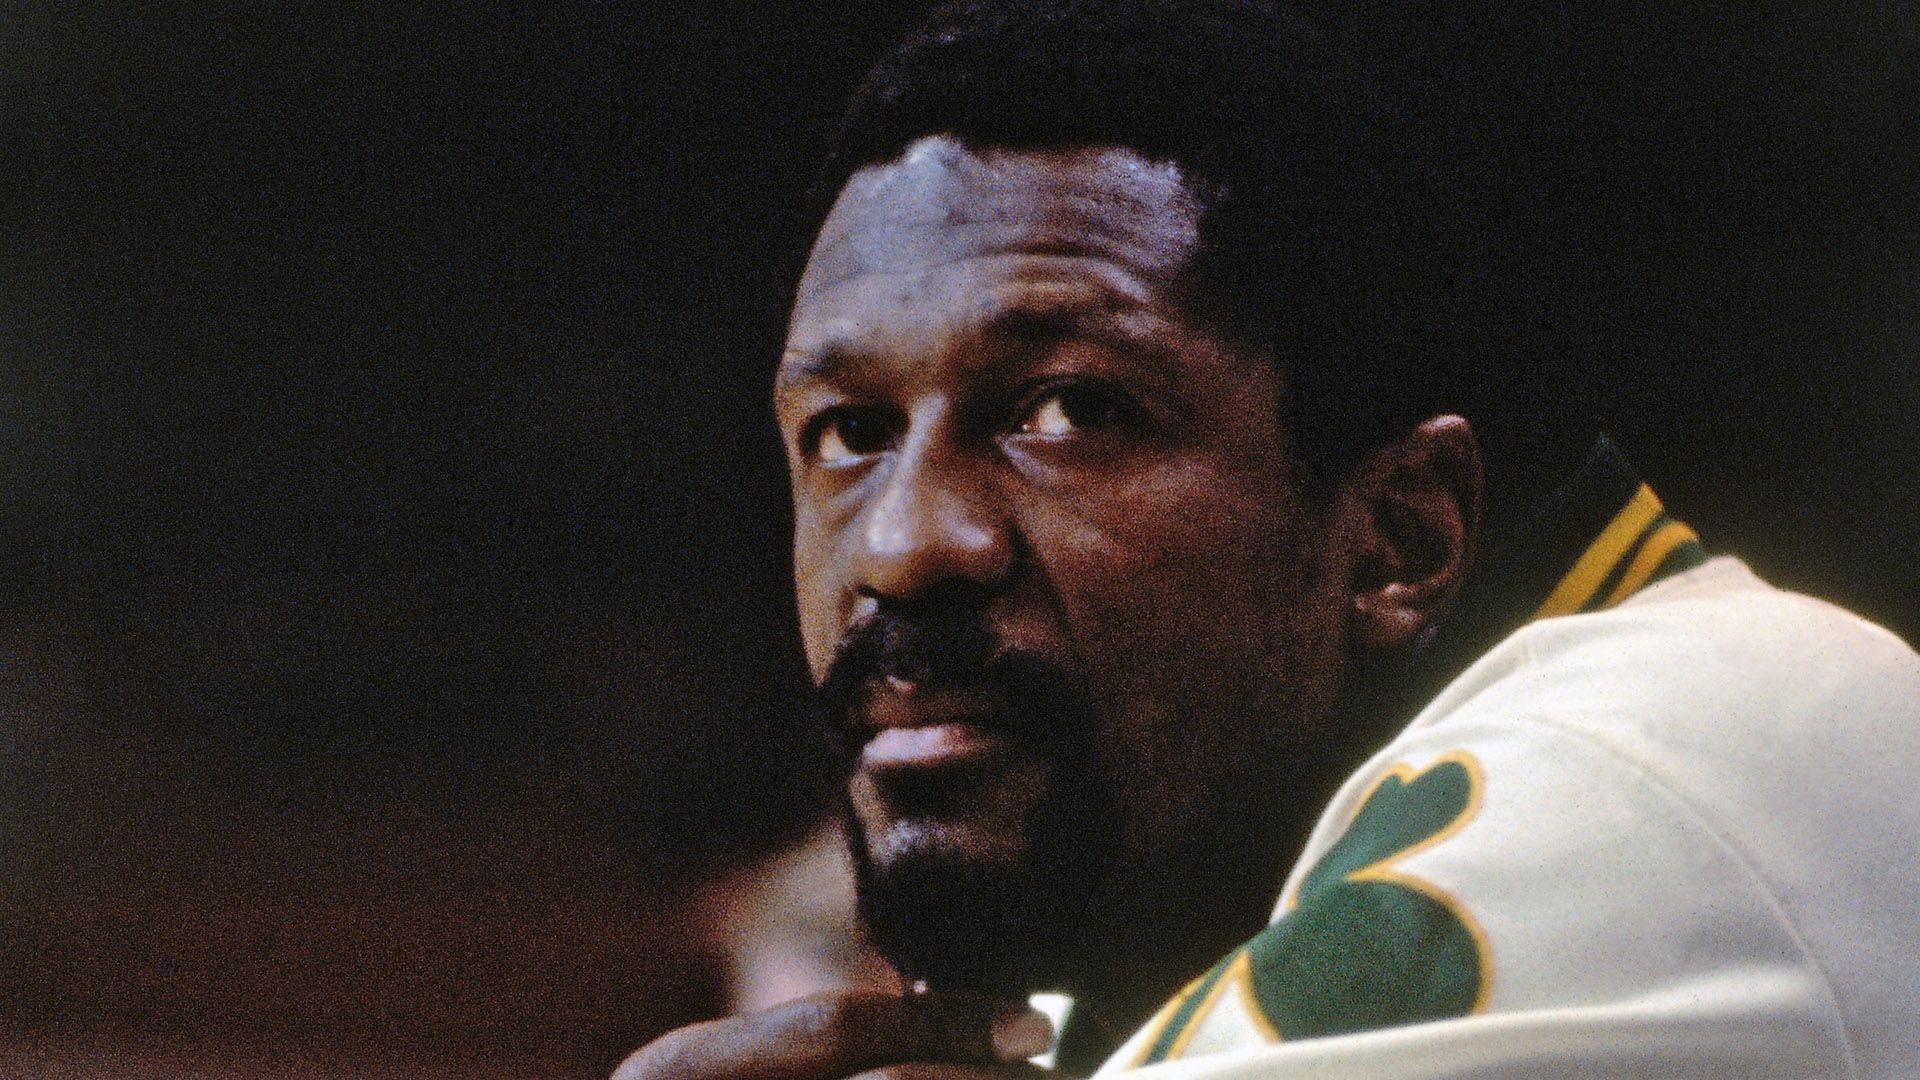  NBA legend Bill Russell died peacefully at the age of 88